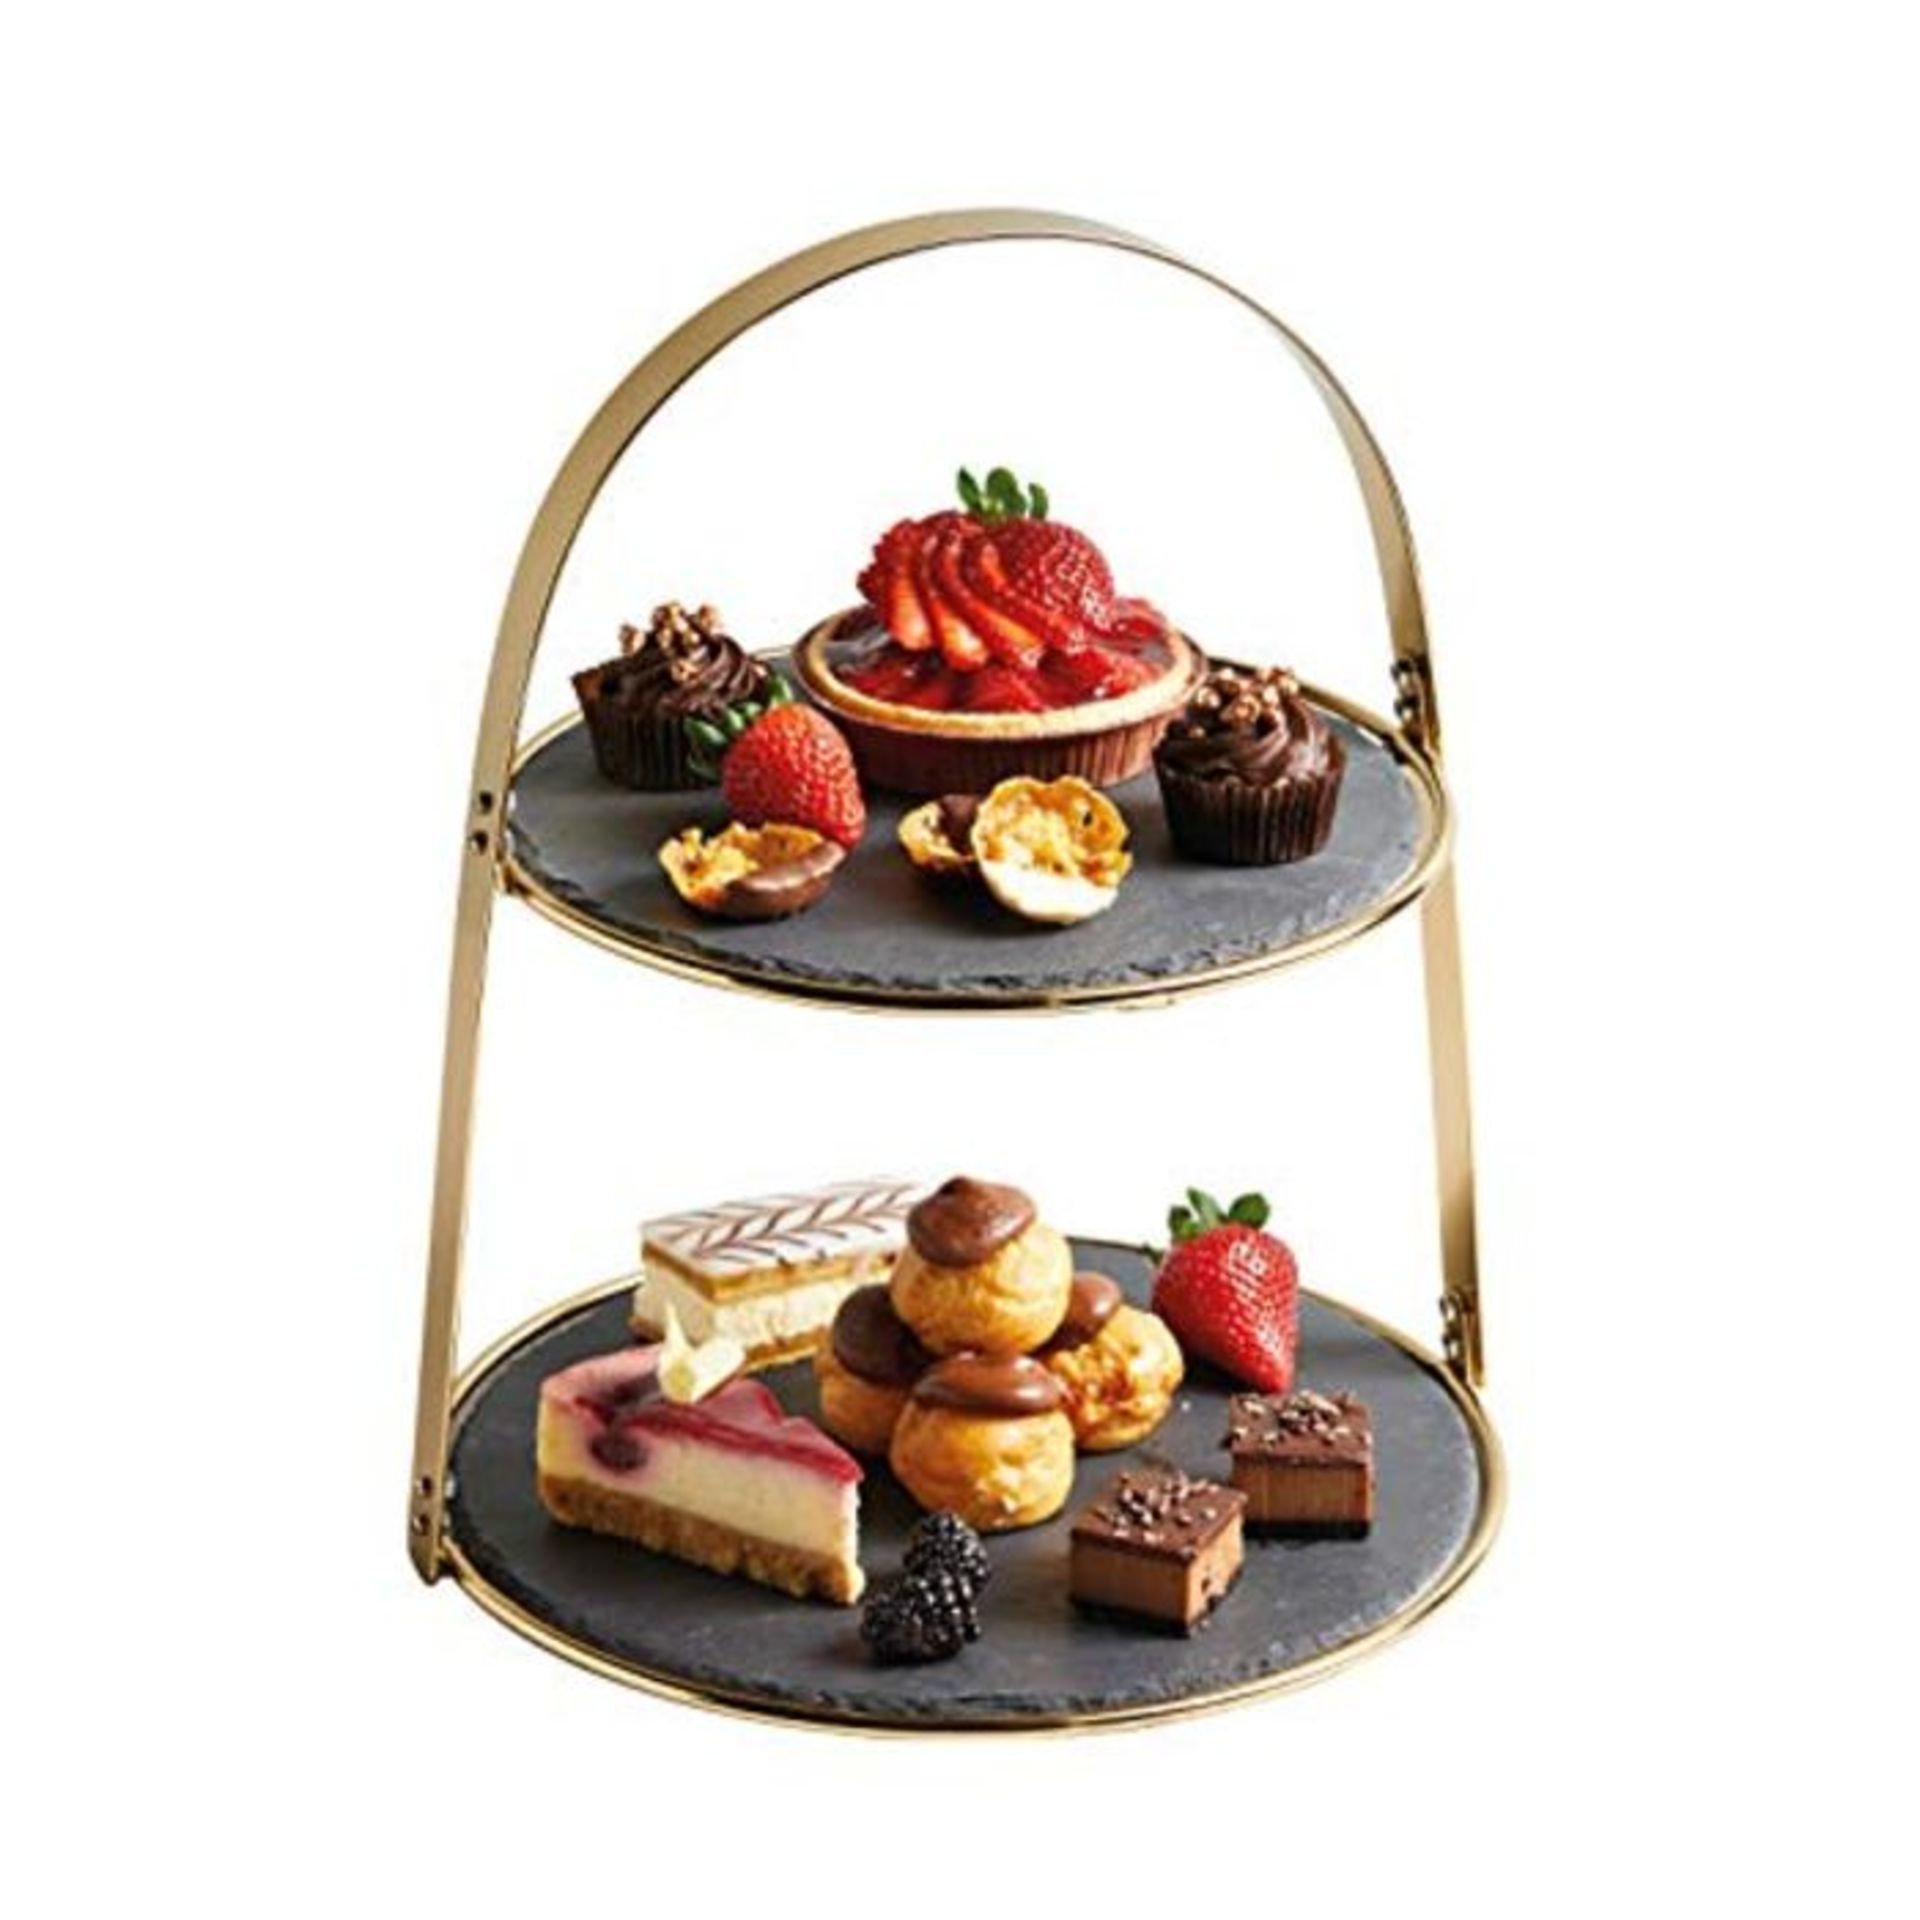 Artesà 2-Tiered Cake Stand with Round Slate Serving Platters, 29.5 x 29.5 x 35 cm (11